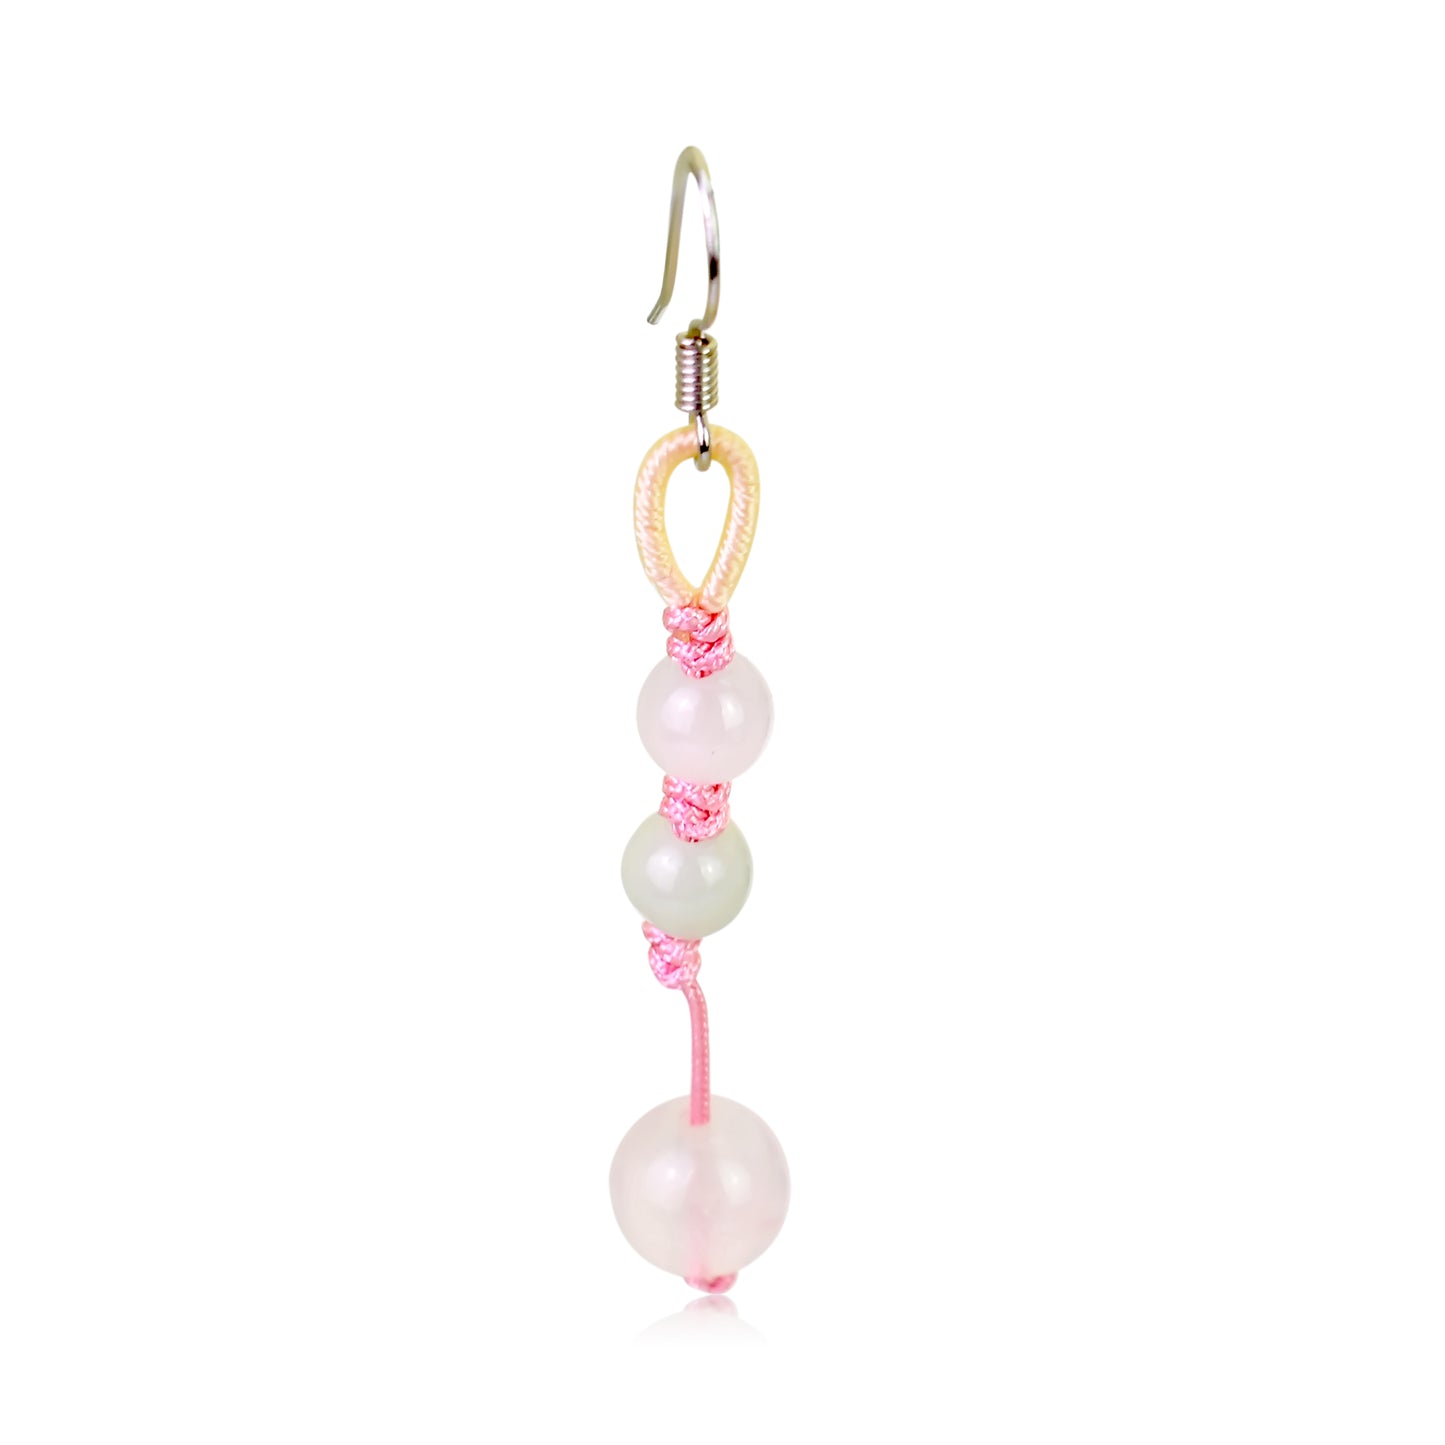 Add a Little Color to Your Look with Playful Beads Rose Quartz Earrings made with Pink Cord